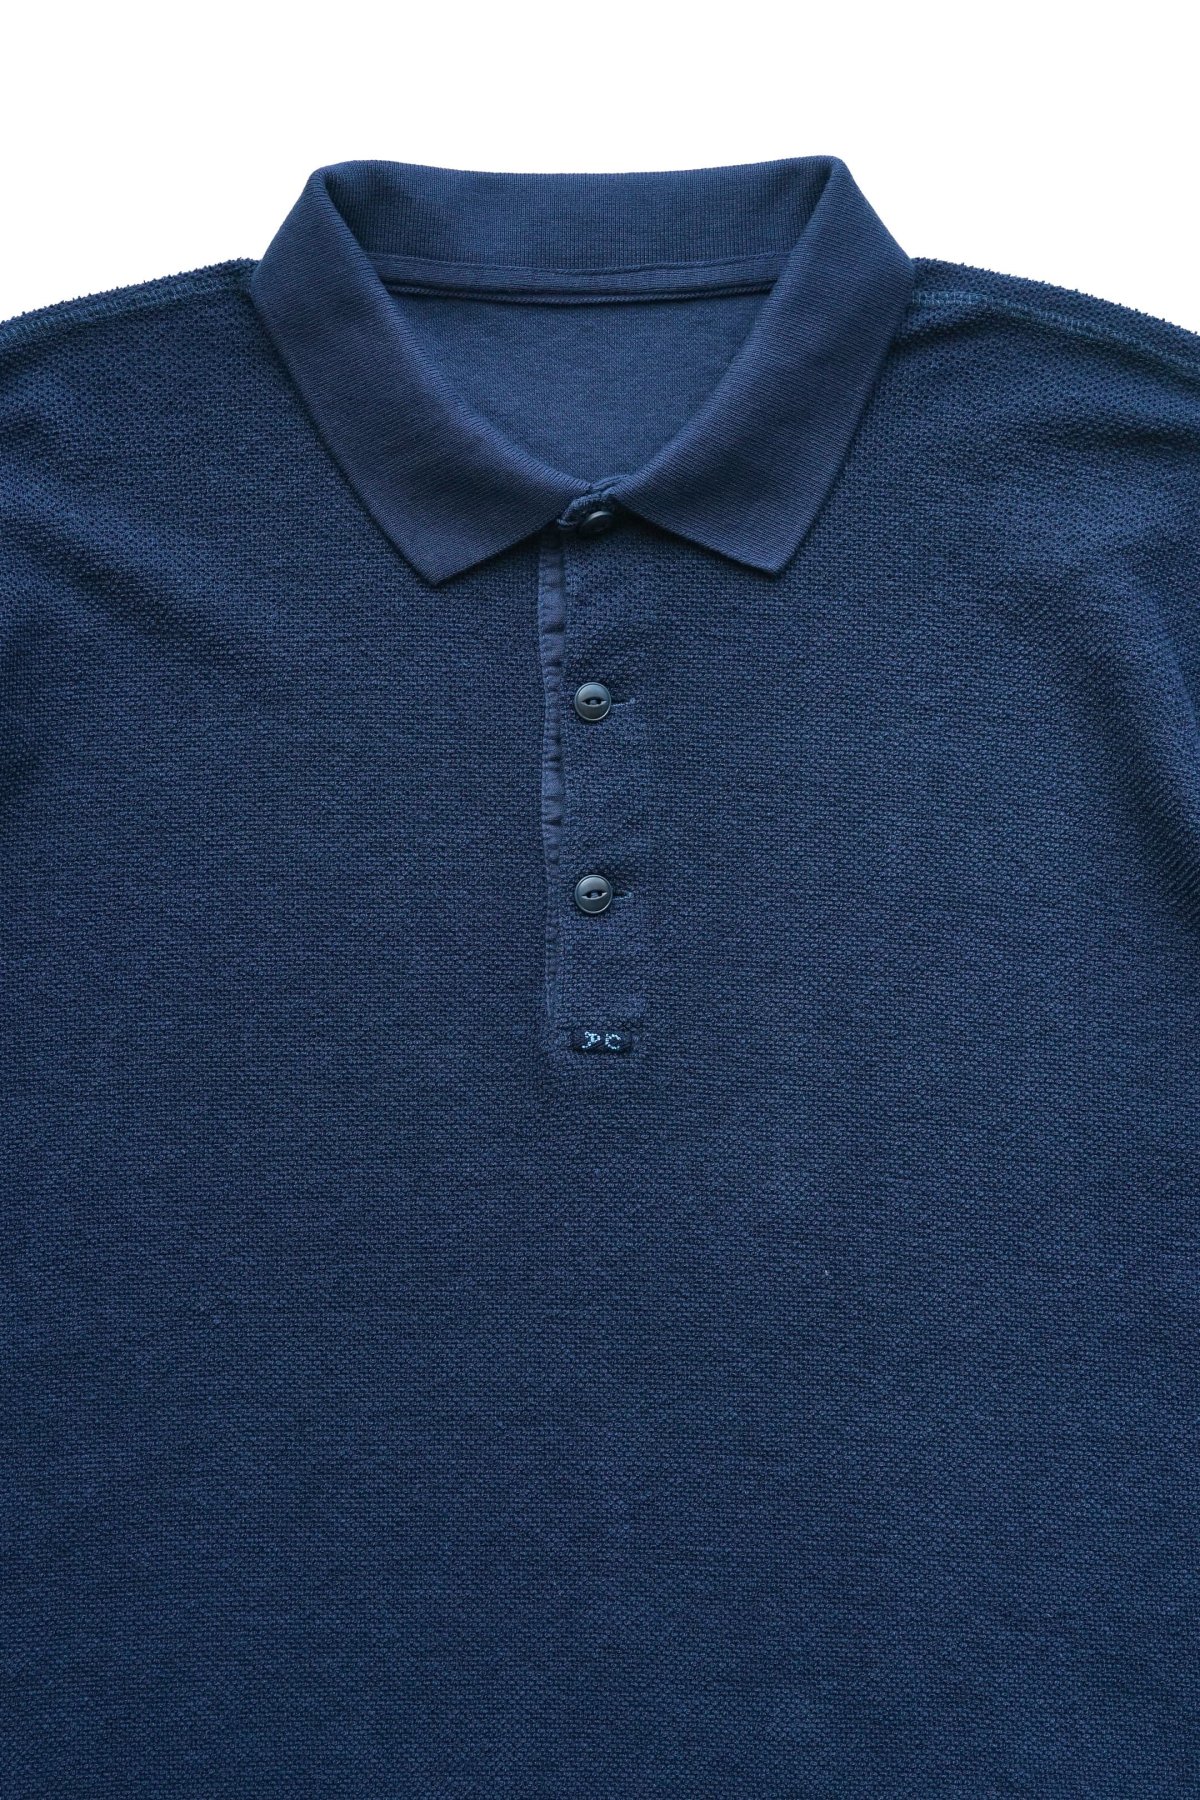 Porter Classic - SUMMER PILE POLO SHIRT - NAVY ポータークラシック ...